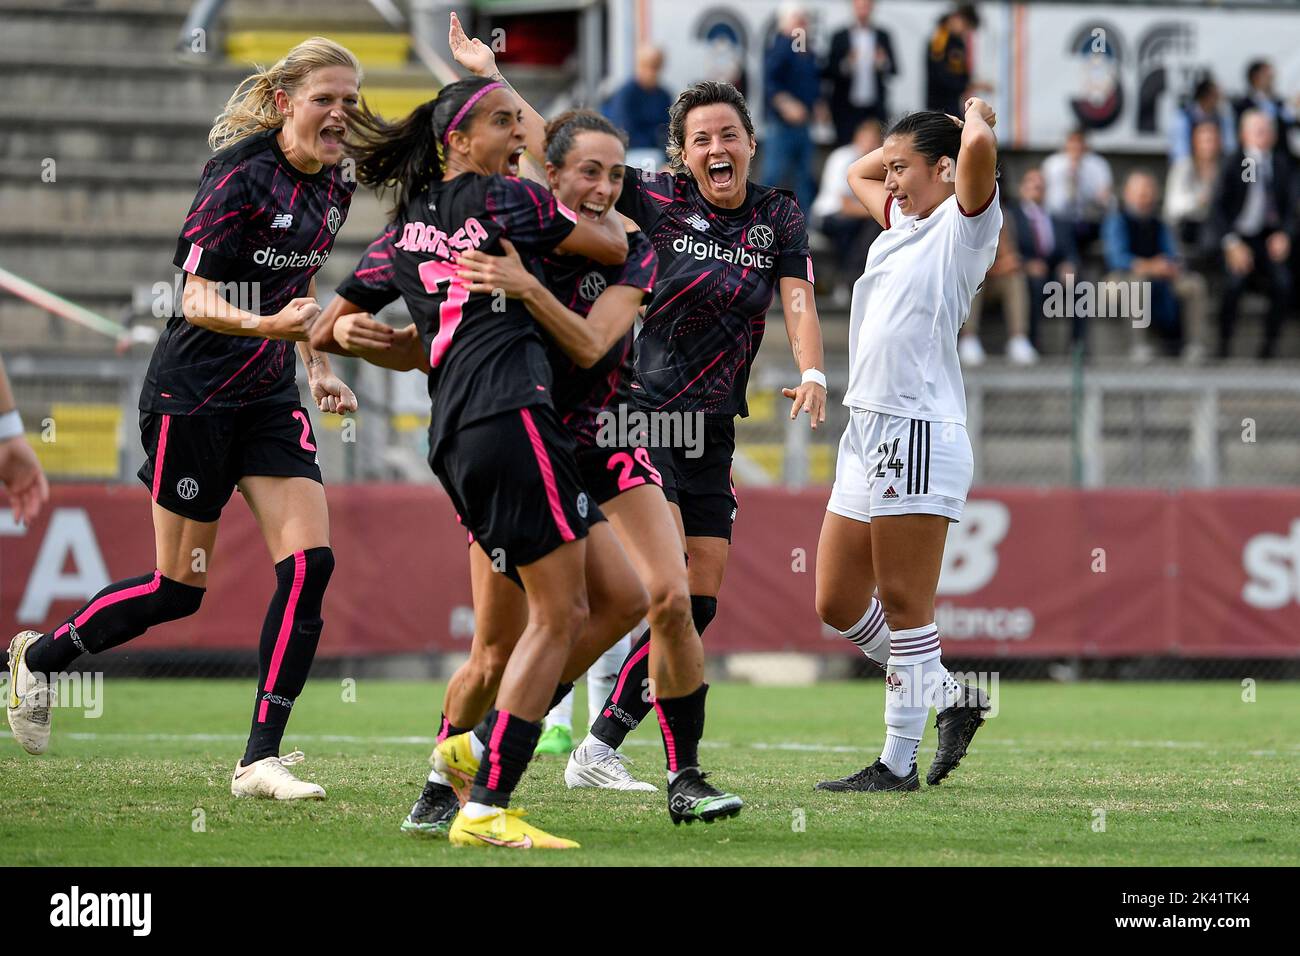 Roma, Italy. 29th Sep, 2022. Andressa Alves da Silva of AS Roma (2l) celebrates with team mates after scoring the goal of 2-1 during the Women Uefa Champions League football match between AS Roma and AC Sparta Praha at stadio delle tre fontane, Roma (Italy), September 29th, 2022. AS Roma won 4-1 over AC Sparta Praha. Photo Andrea Staccioli/Insidefoto Credit: Insidefoto di andrea staccioli/Alamy Live News Stock Photo